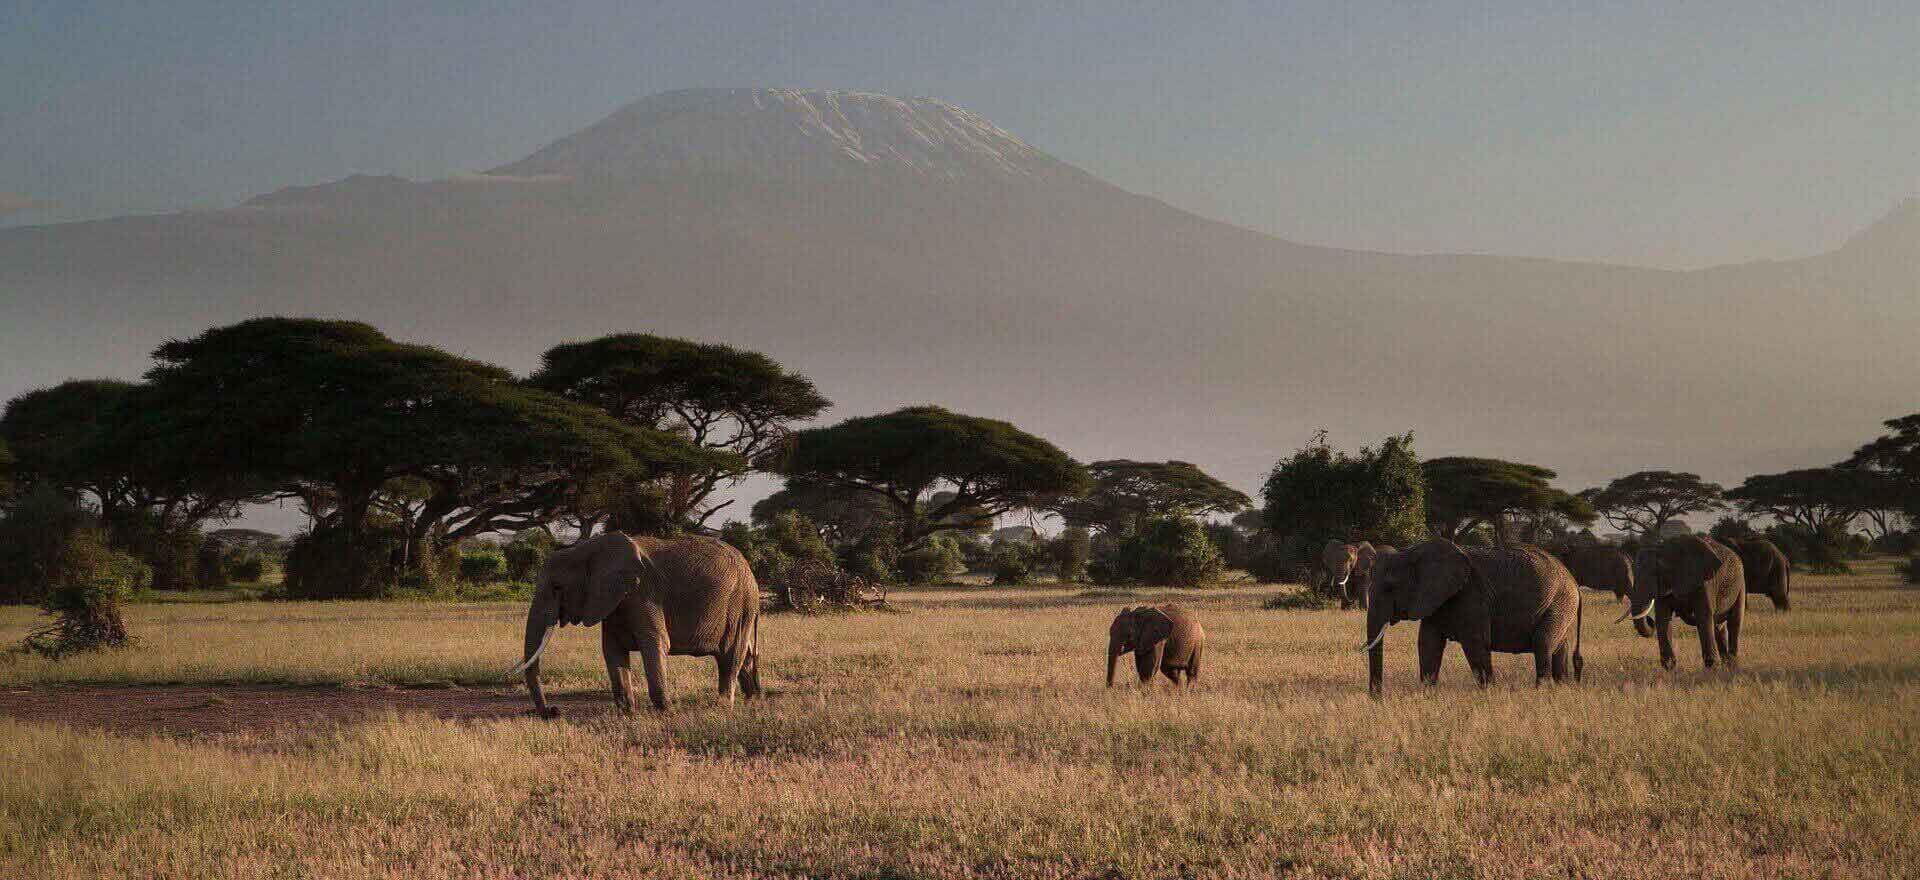  A herd of elephants with a mountain the background